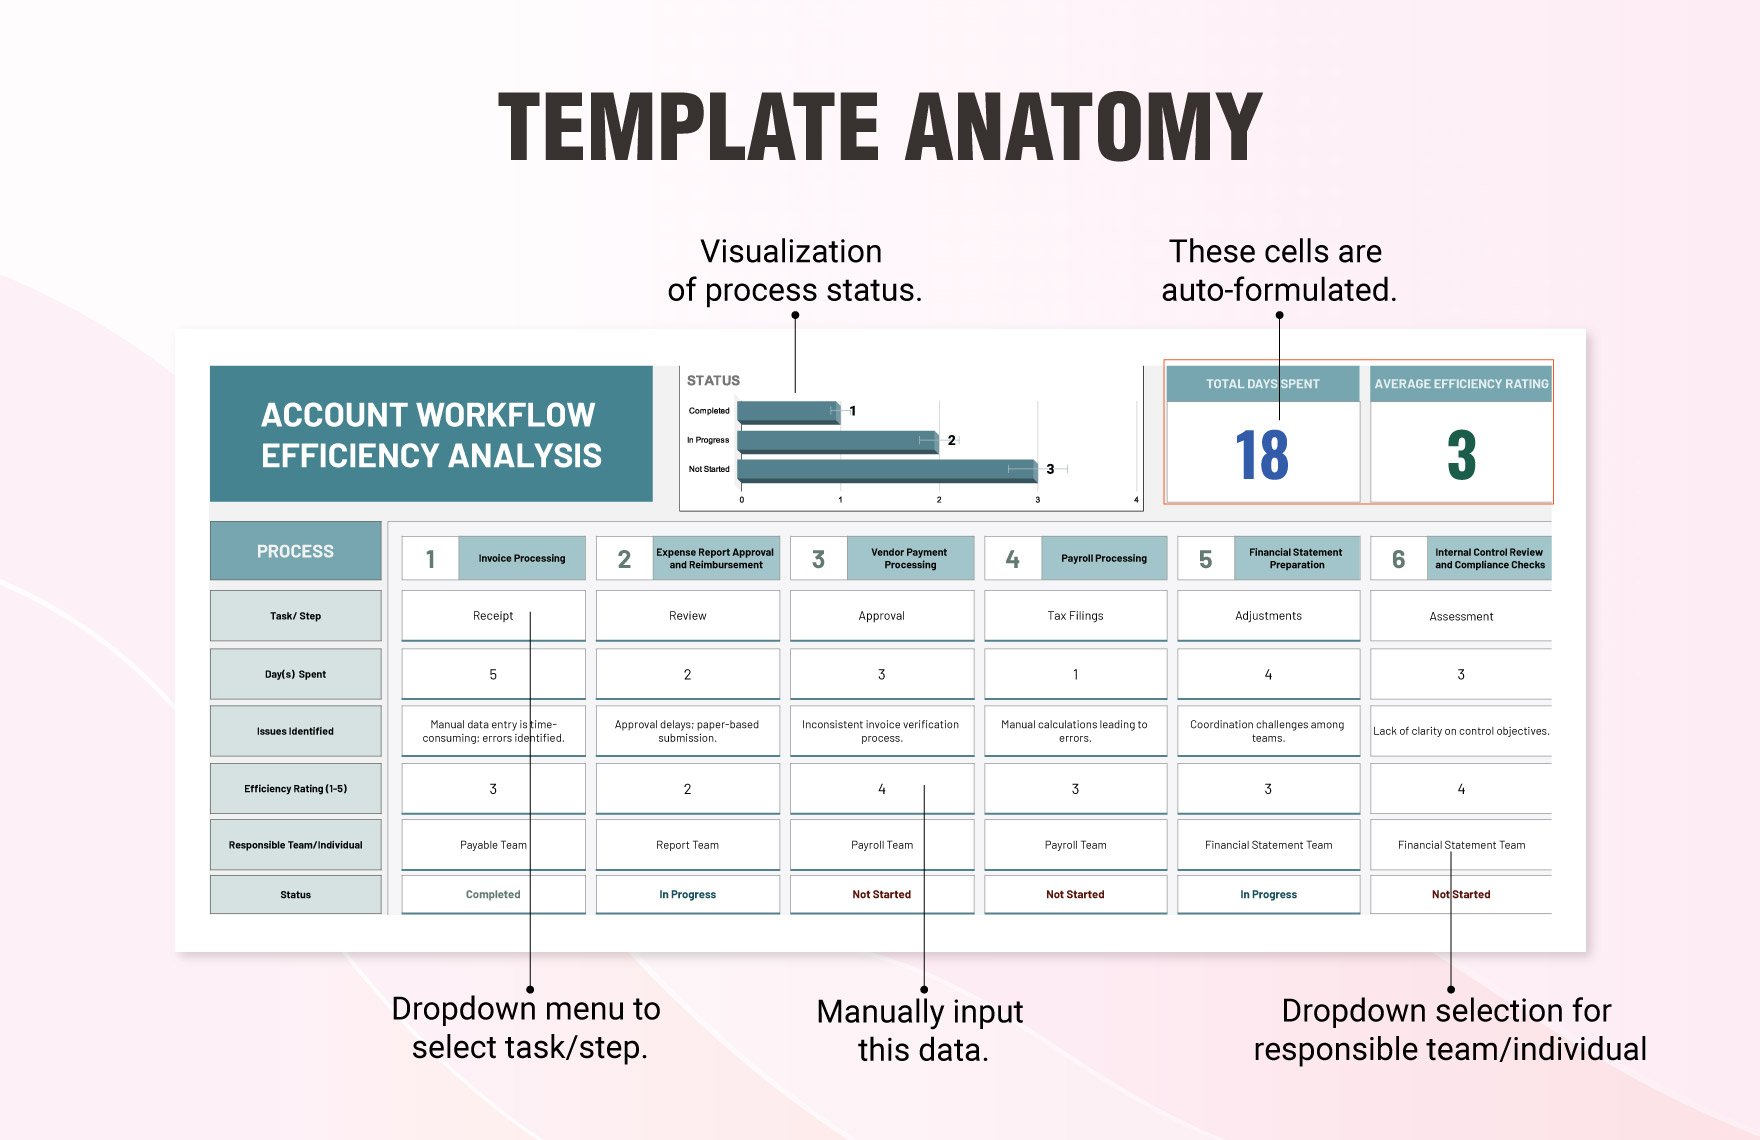 Accounts Workflow Efficiency Analysis Template